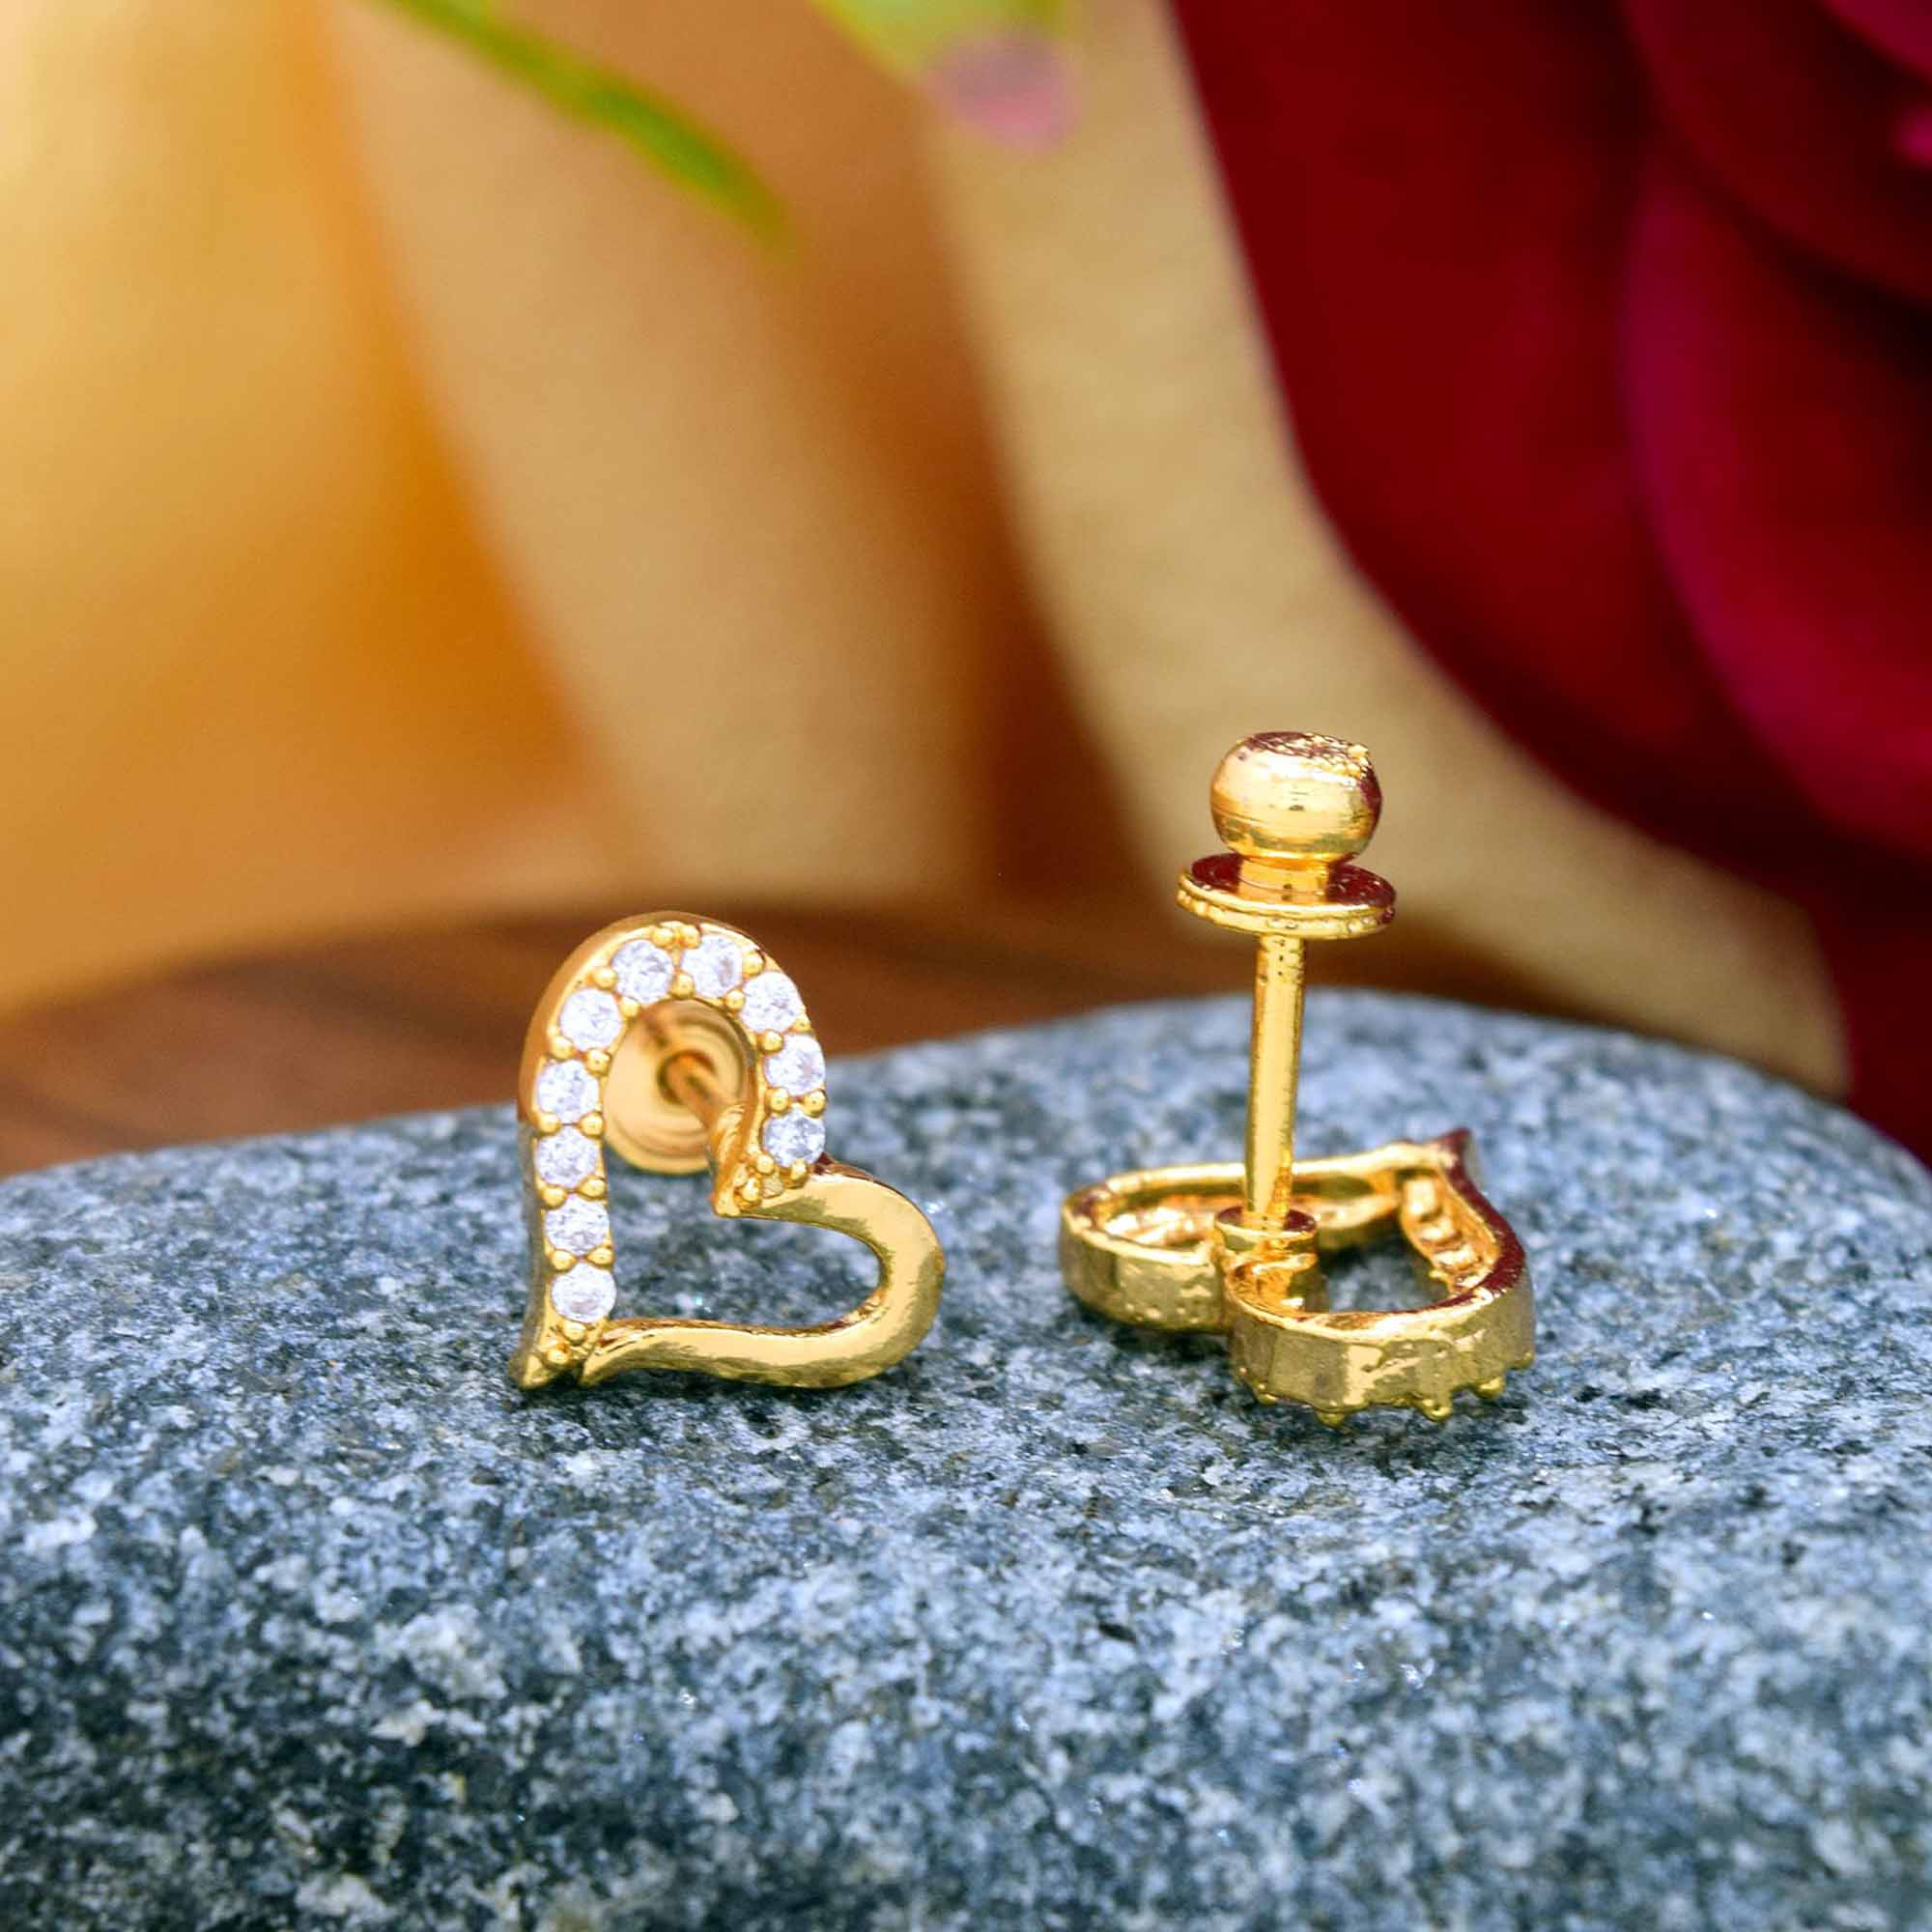 Gold Plated Stylish Quality Heart Theme Earrings With Stone For Women Love Gift (NBLK) Stud earrings NowBuy.lk 4